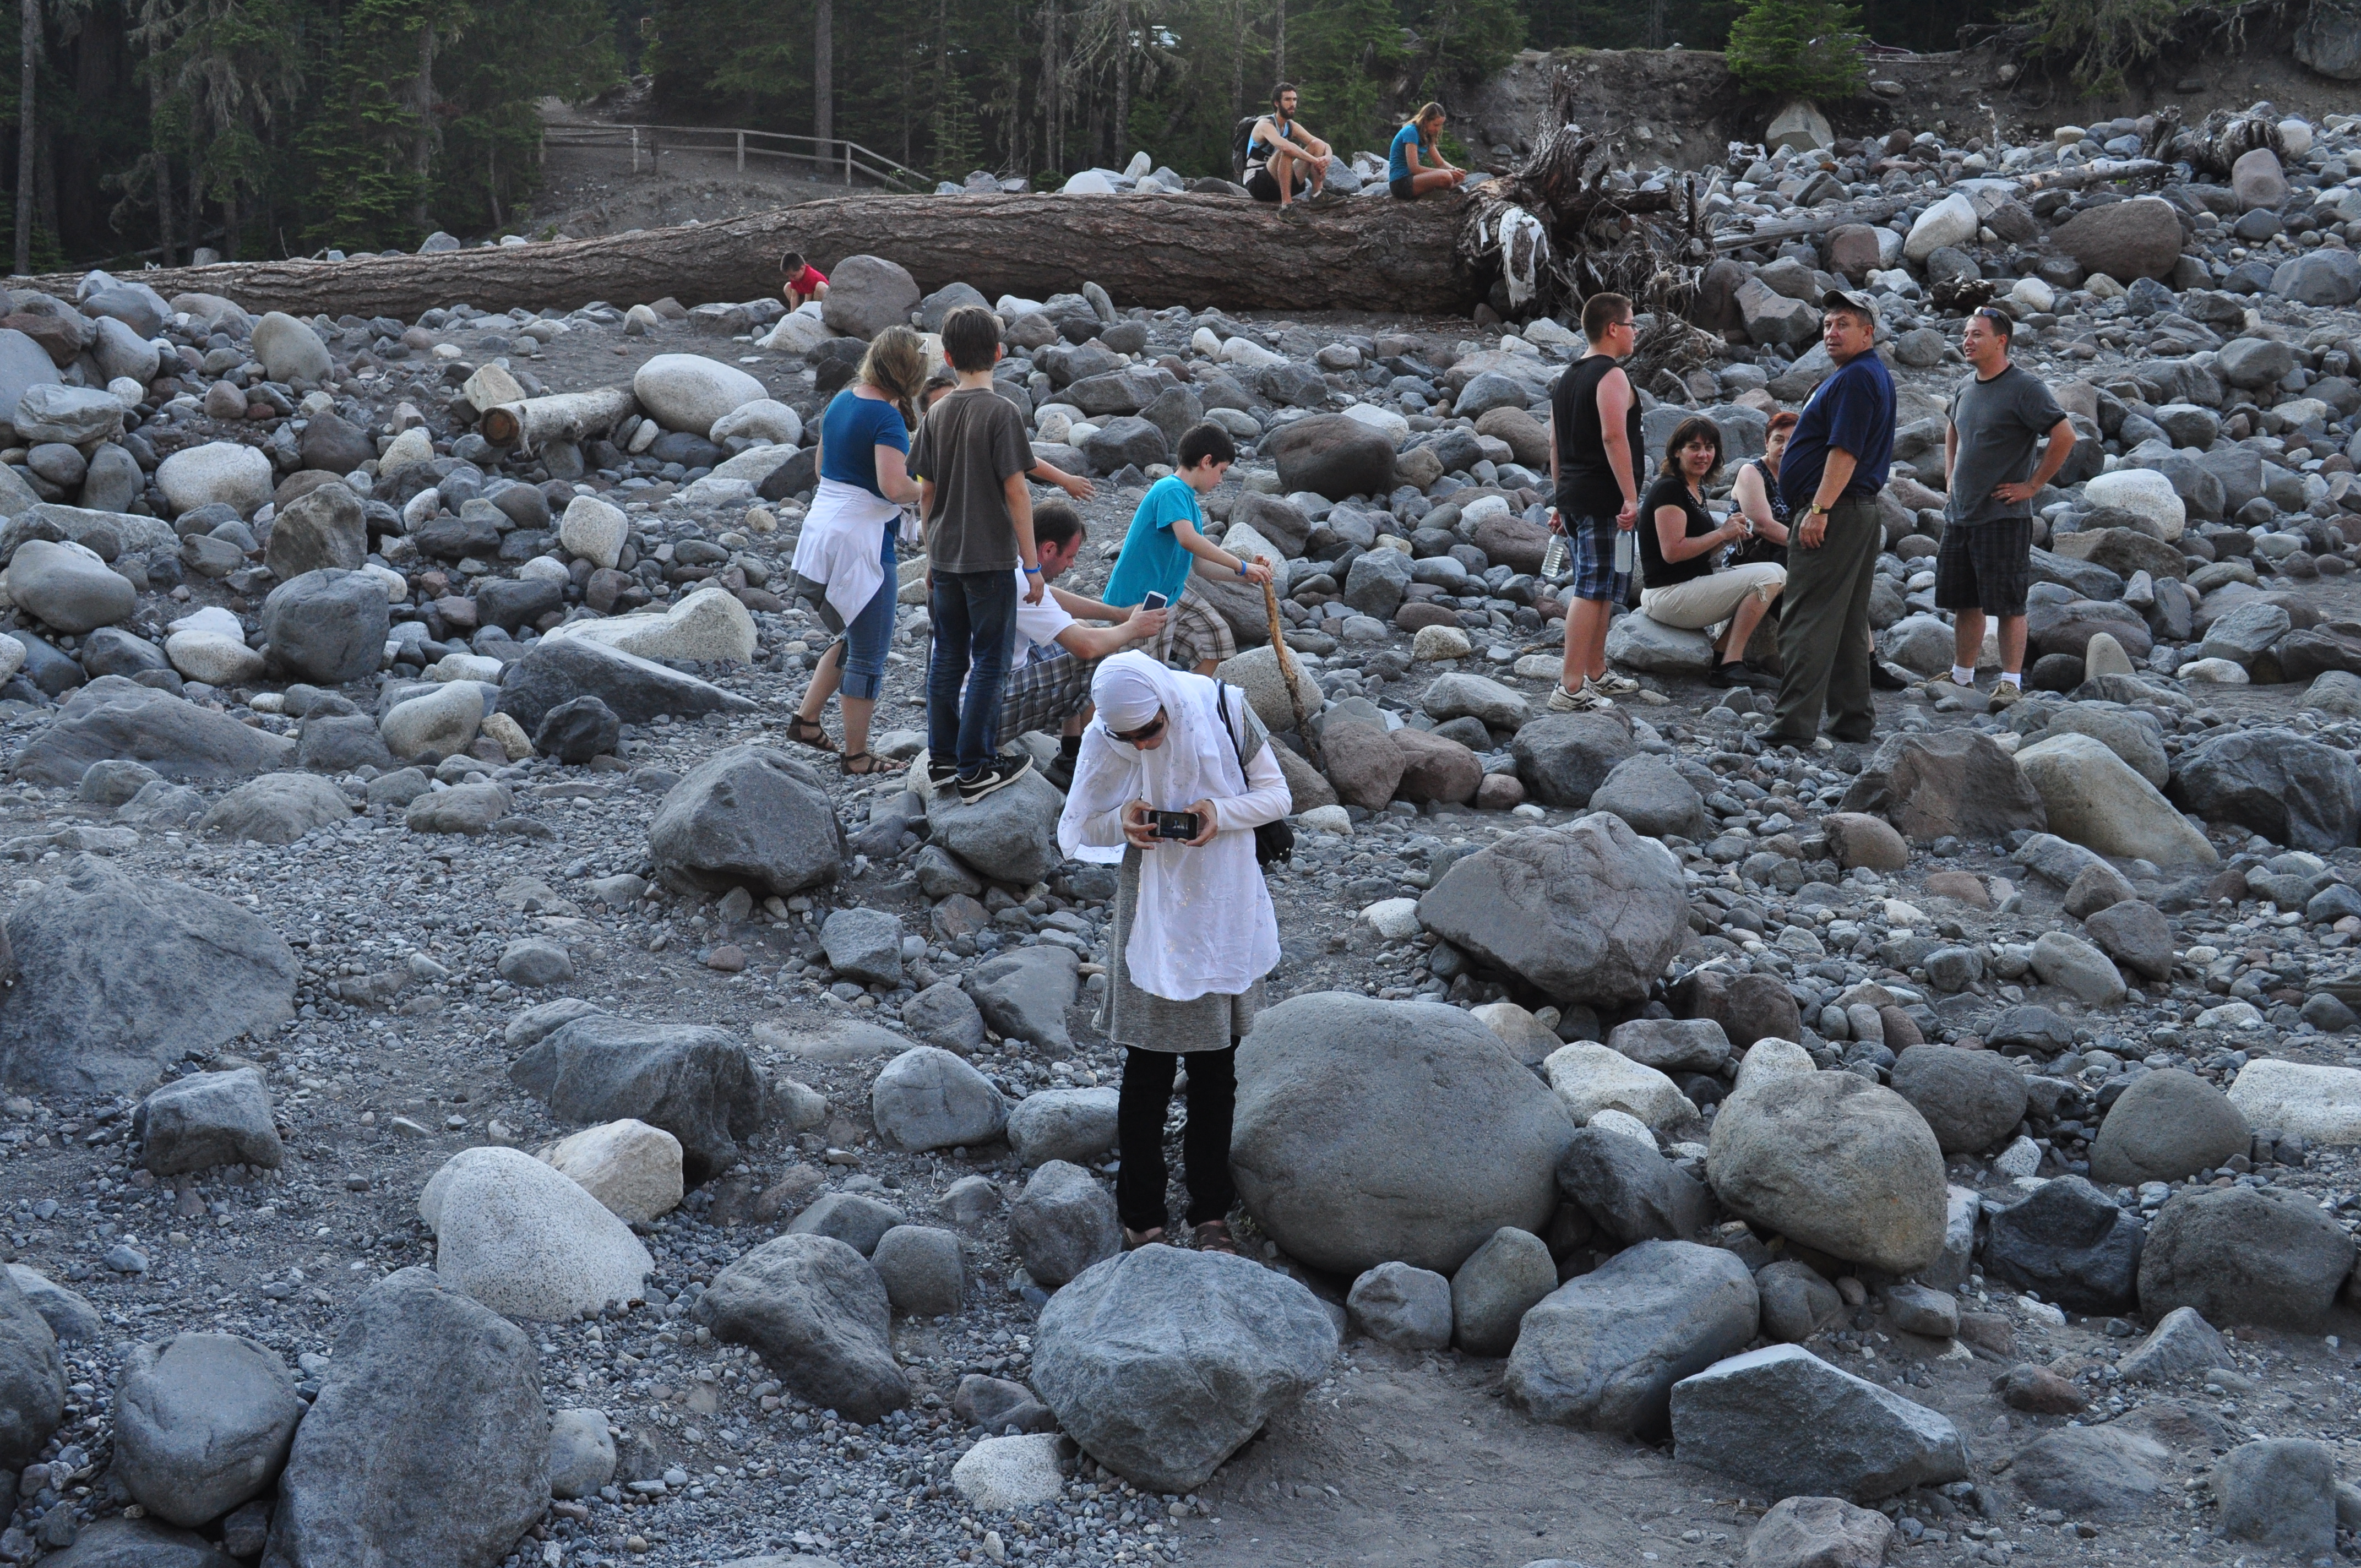 File:On Nisqually River bed near Cougar Rock 01.jpg - Wikimedia Commons